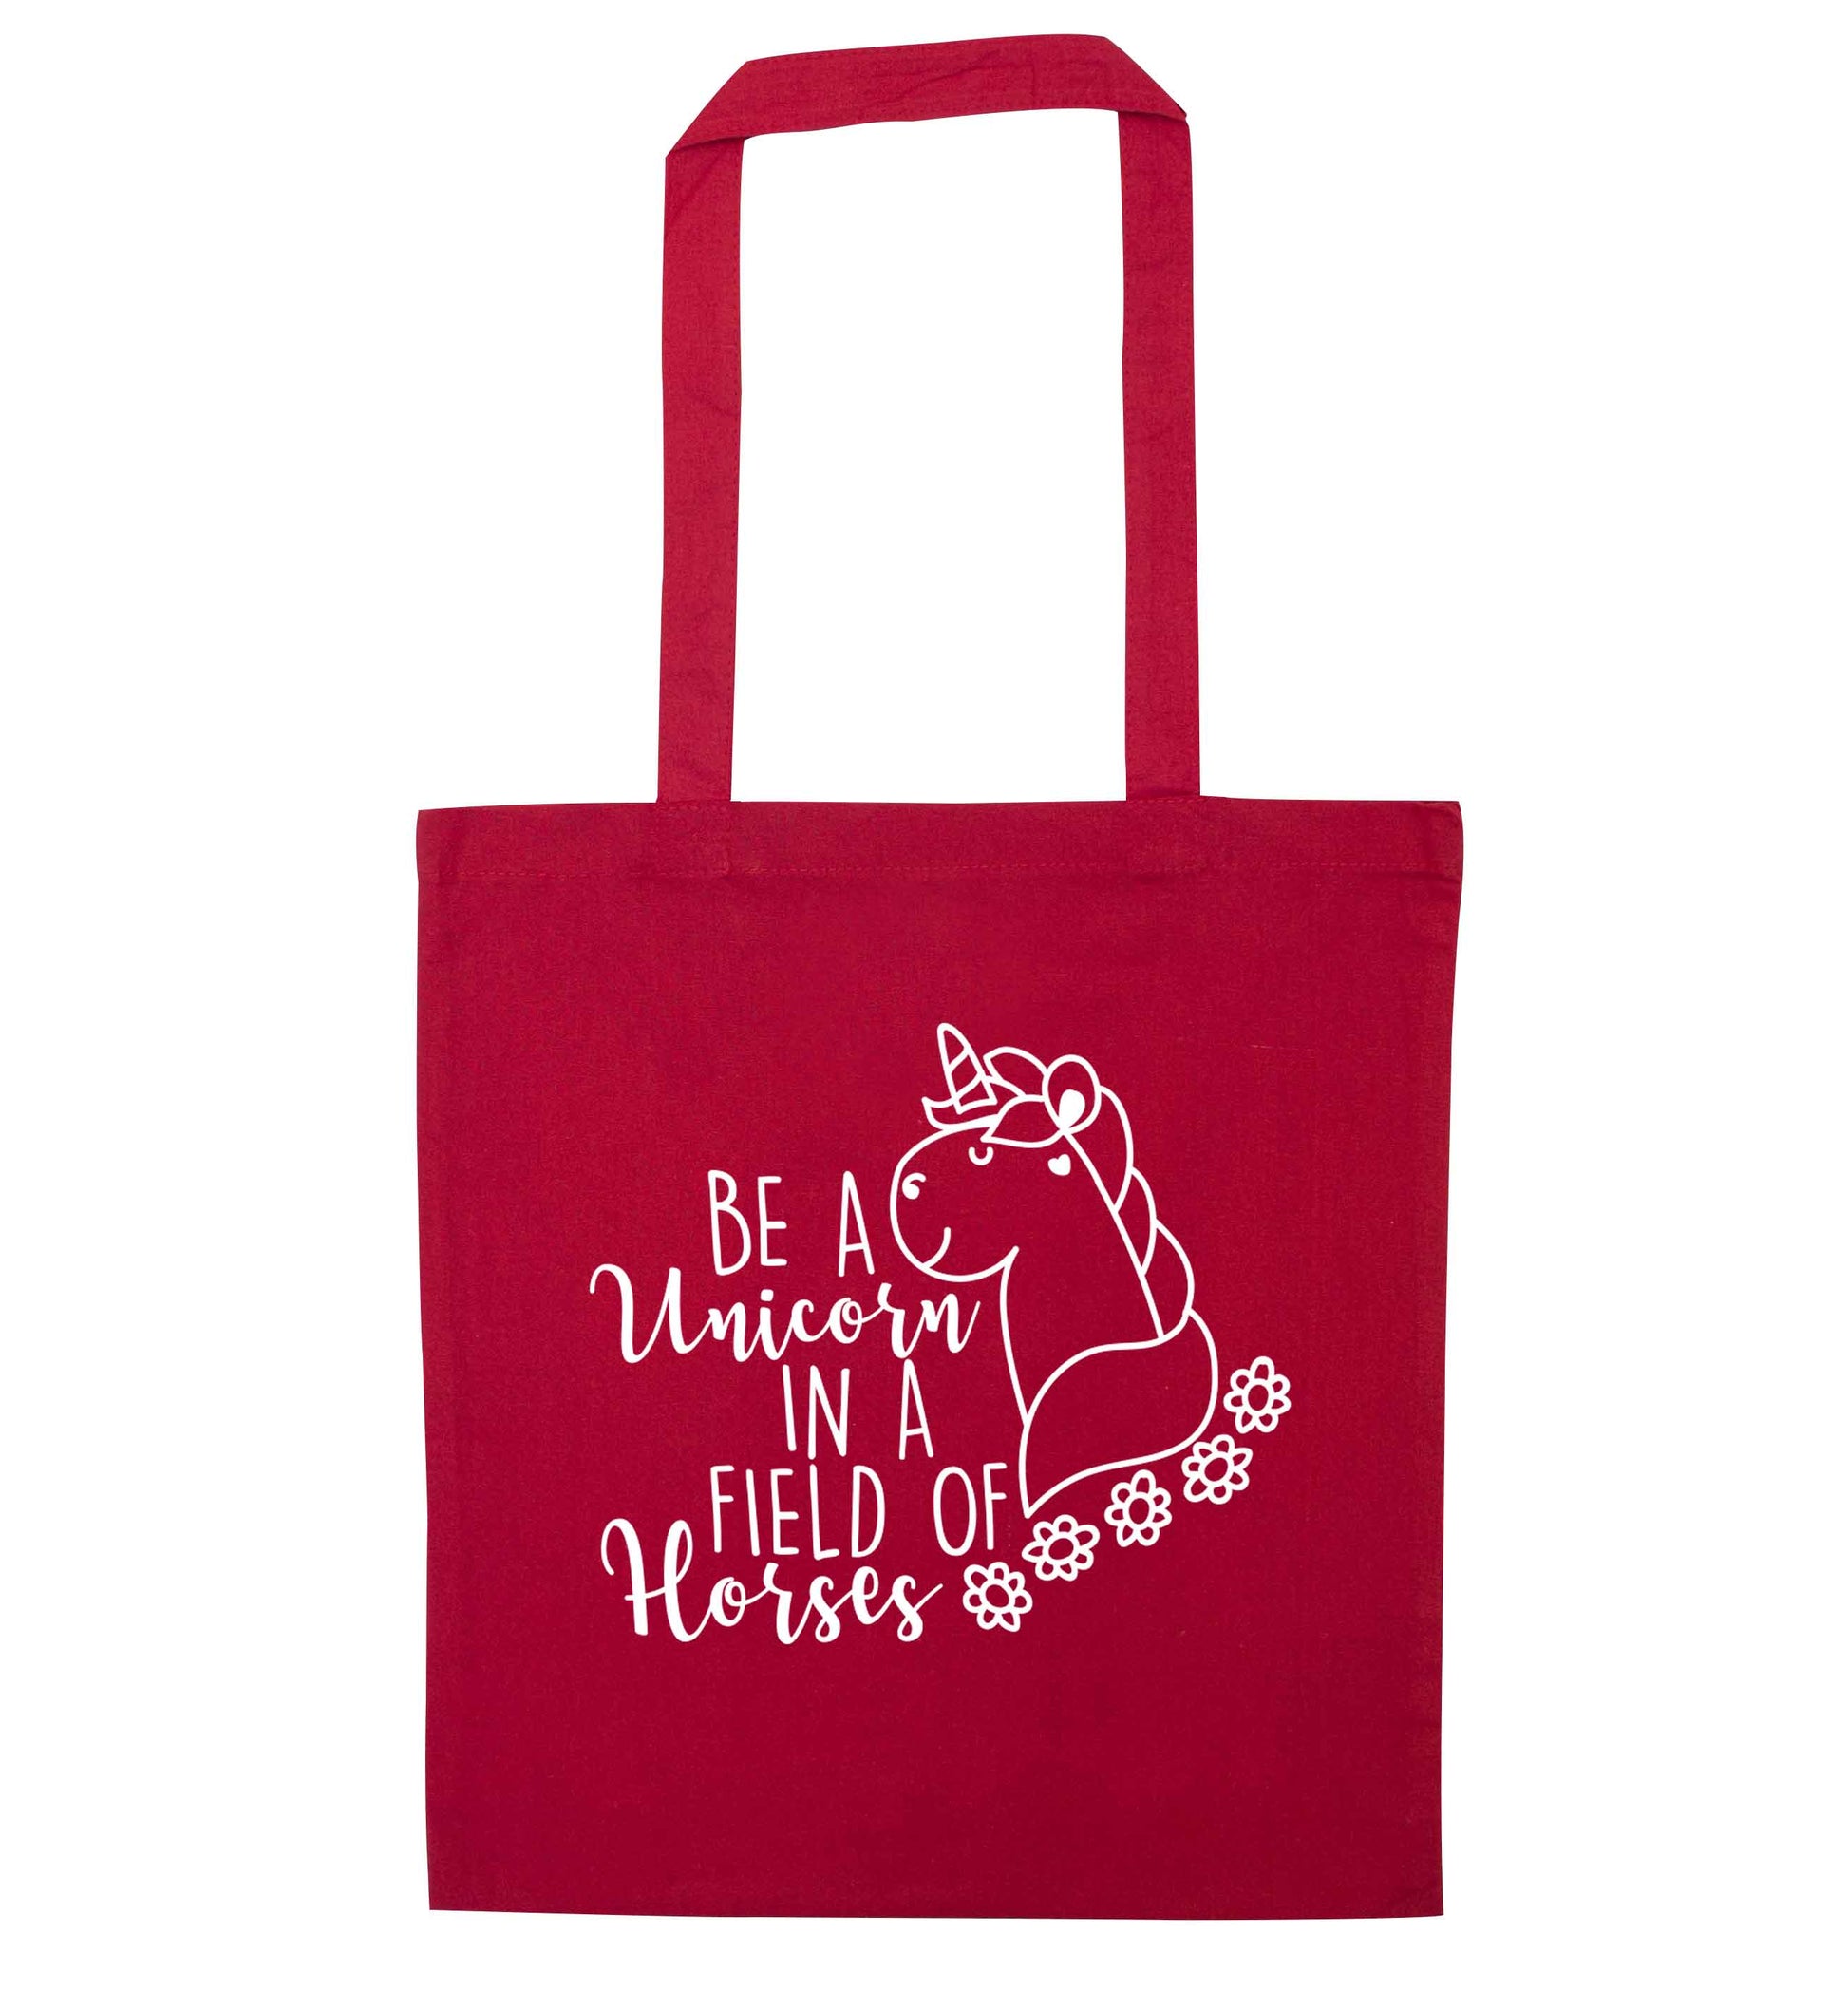 Be a unicorn in a field of horses red tote bag